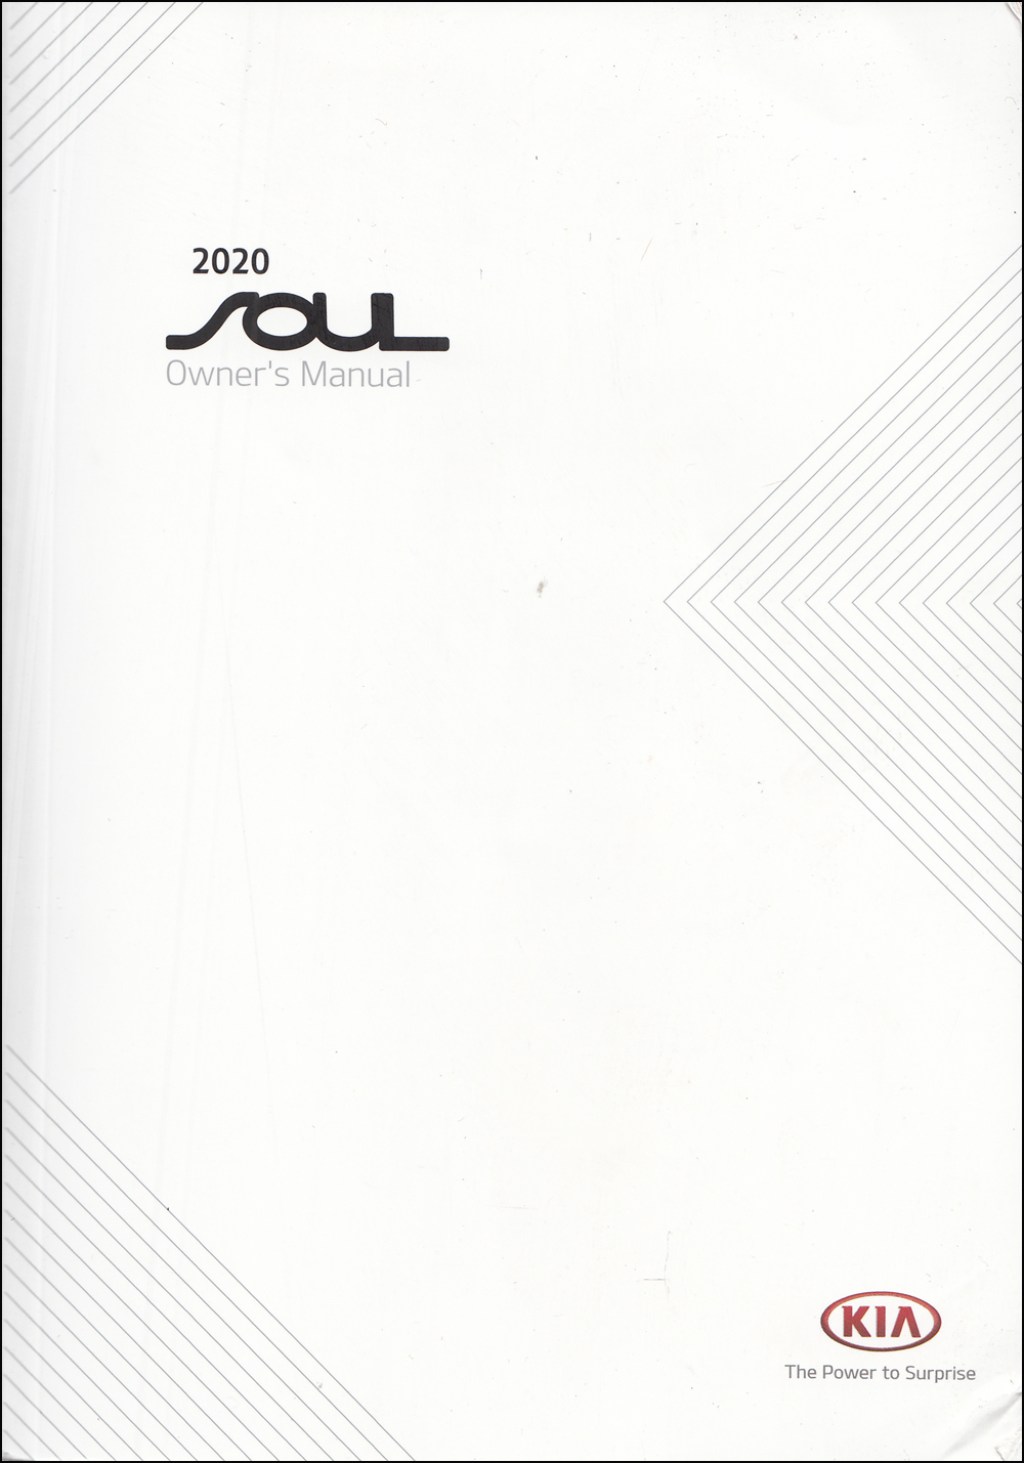 Picture of: Kia Soul Owner’s Manual Original Package with Case and Pamphlets